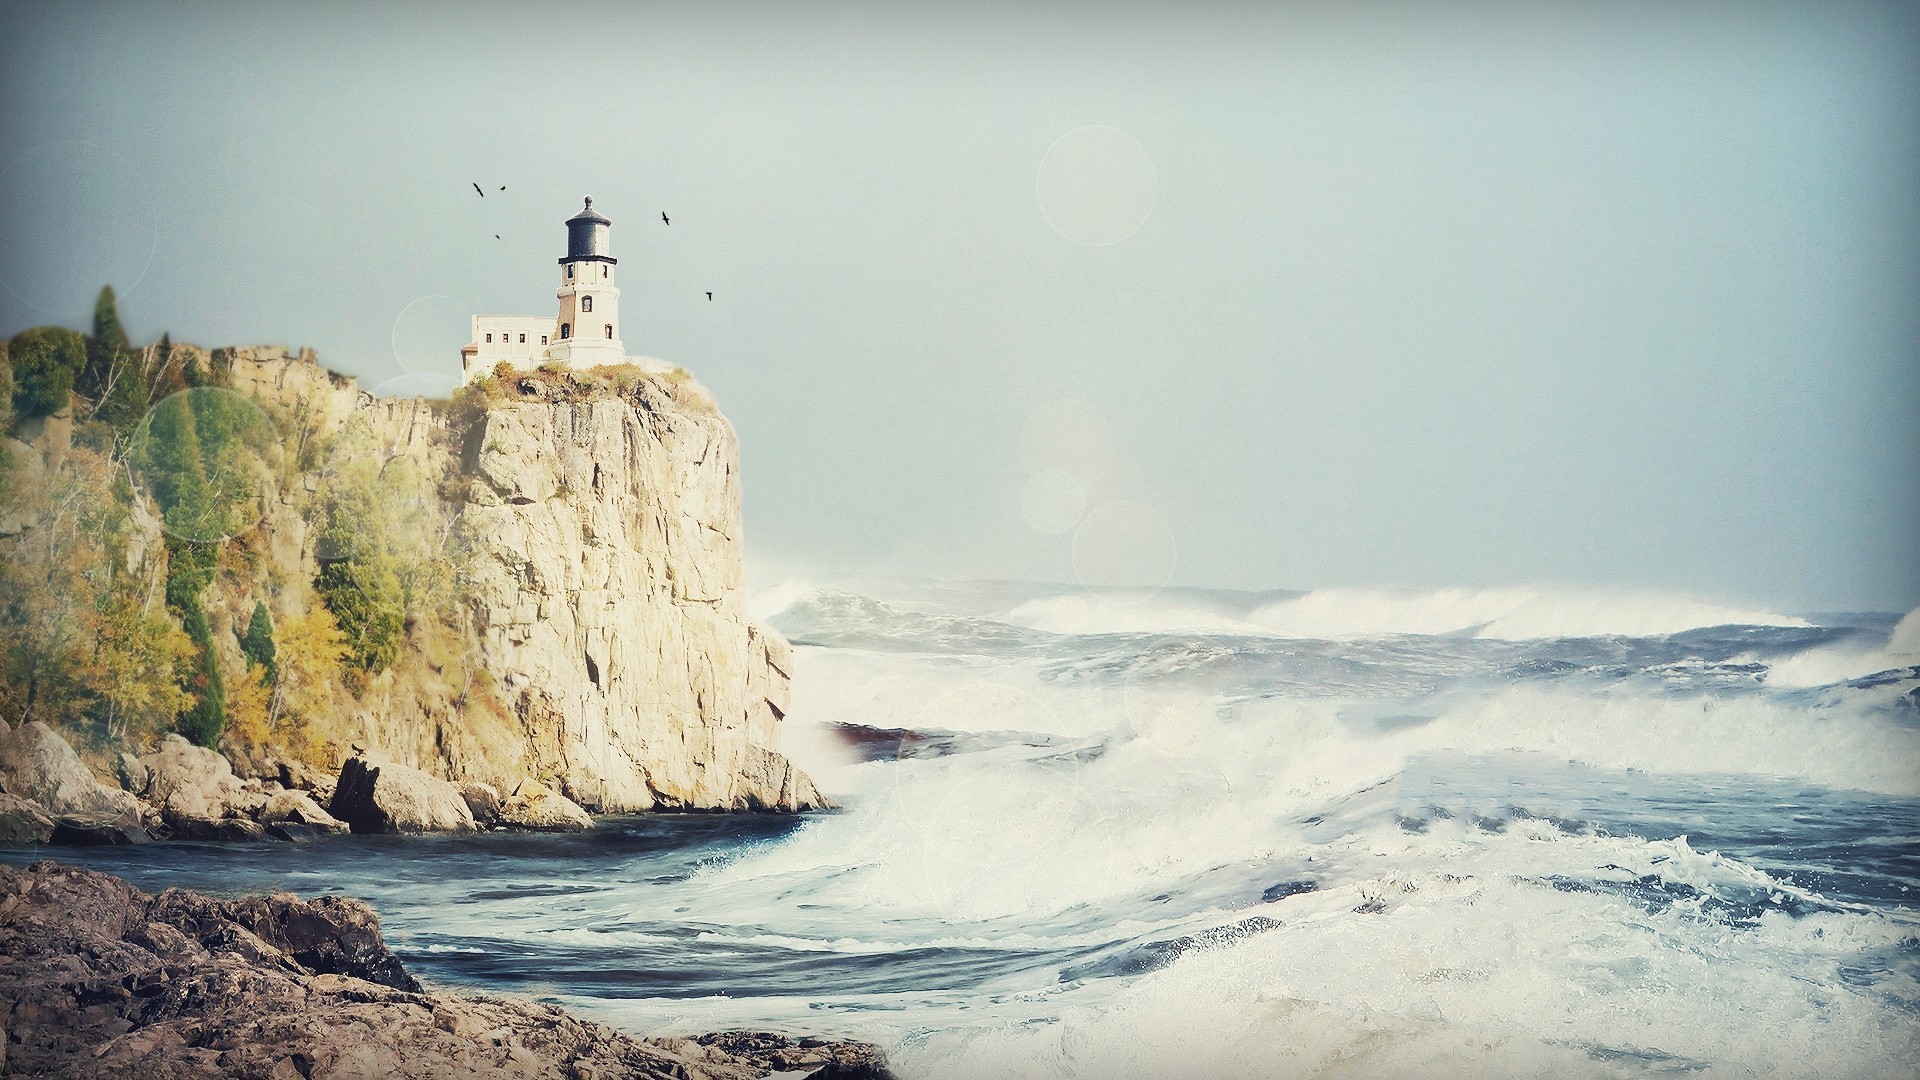 General 1920x1080 lighthouse nature sea cliff outdoors waves coast